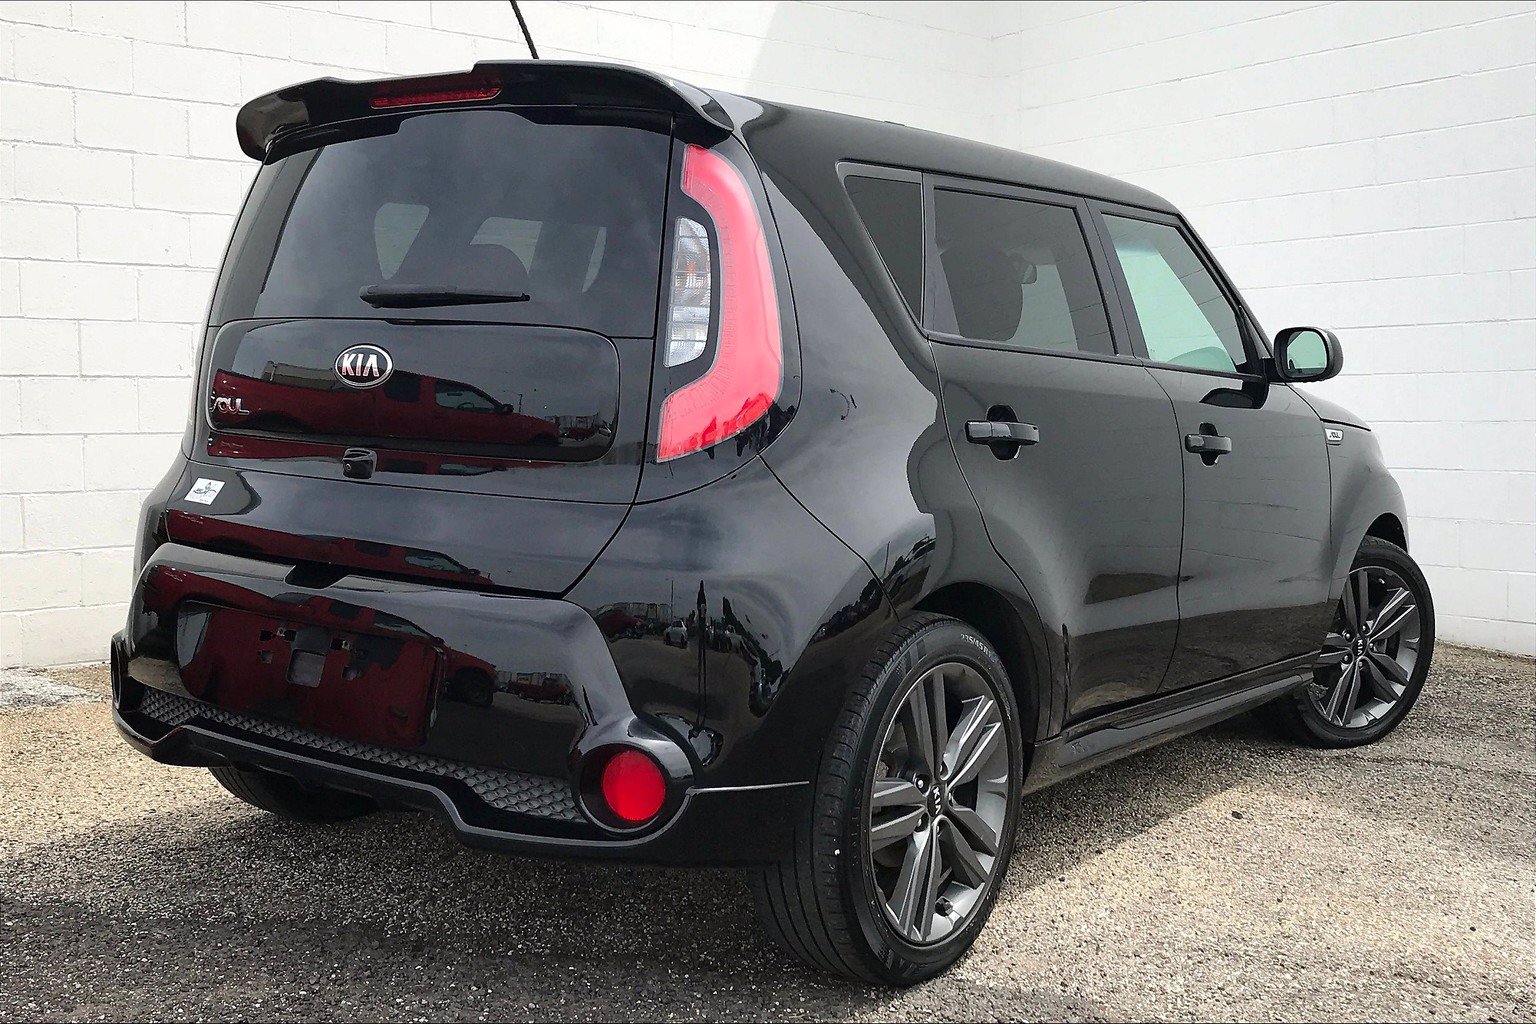 PreOwned 2016 Kia Soul Plus 4D Hatchback in Morton #362720  Mike